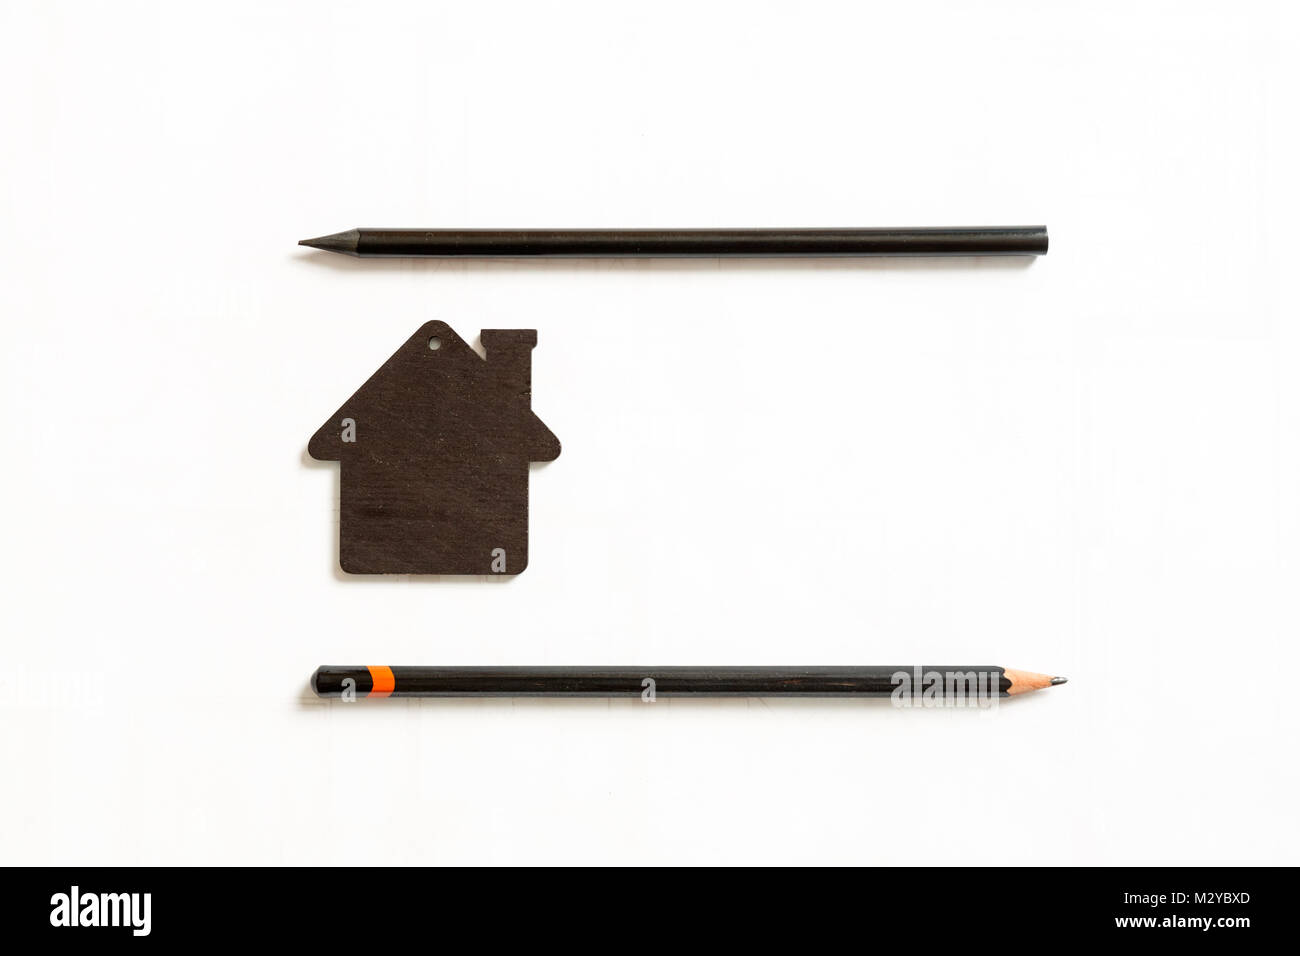 Image of small black model of a house with black pencils on a white background Stock Photo